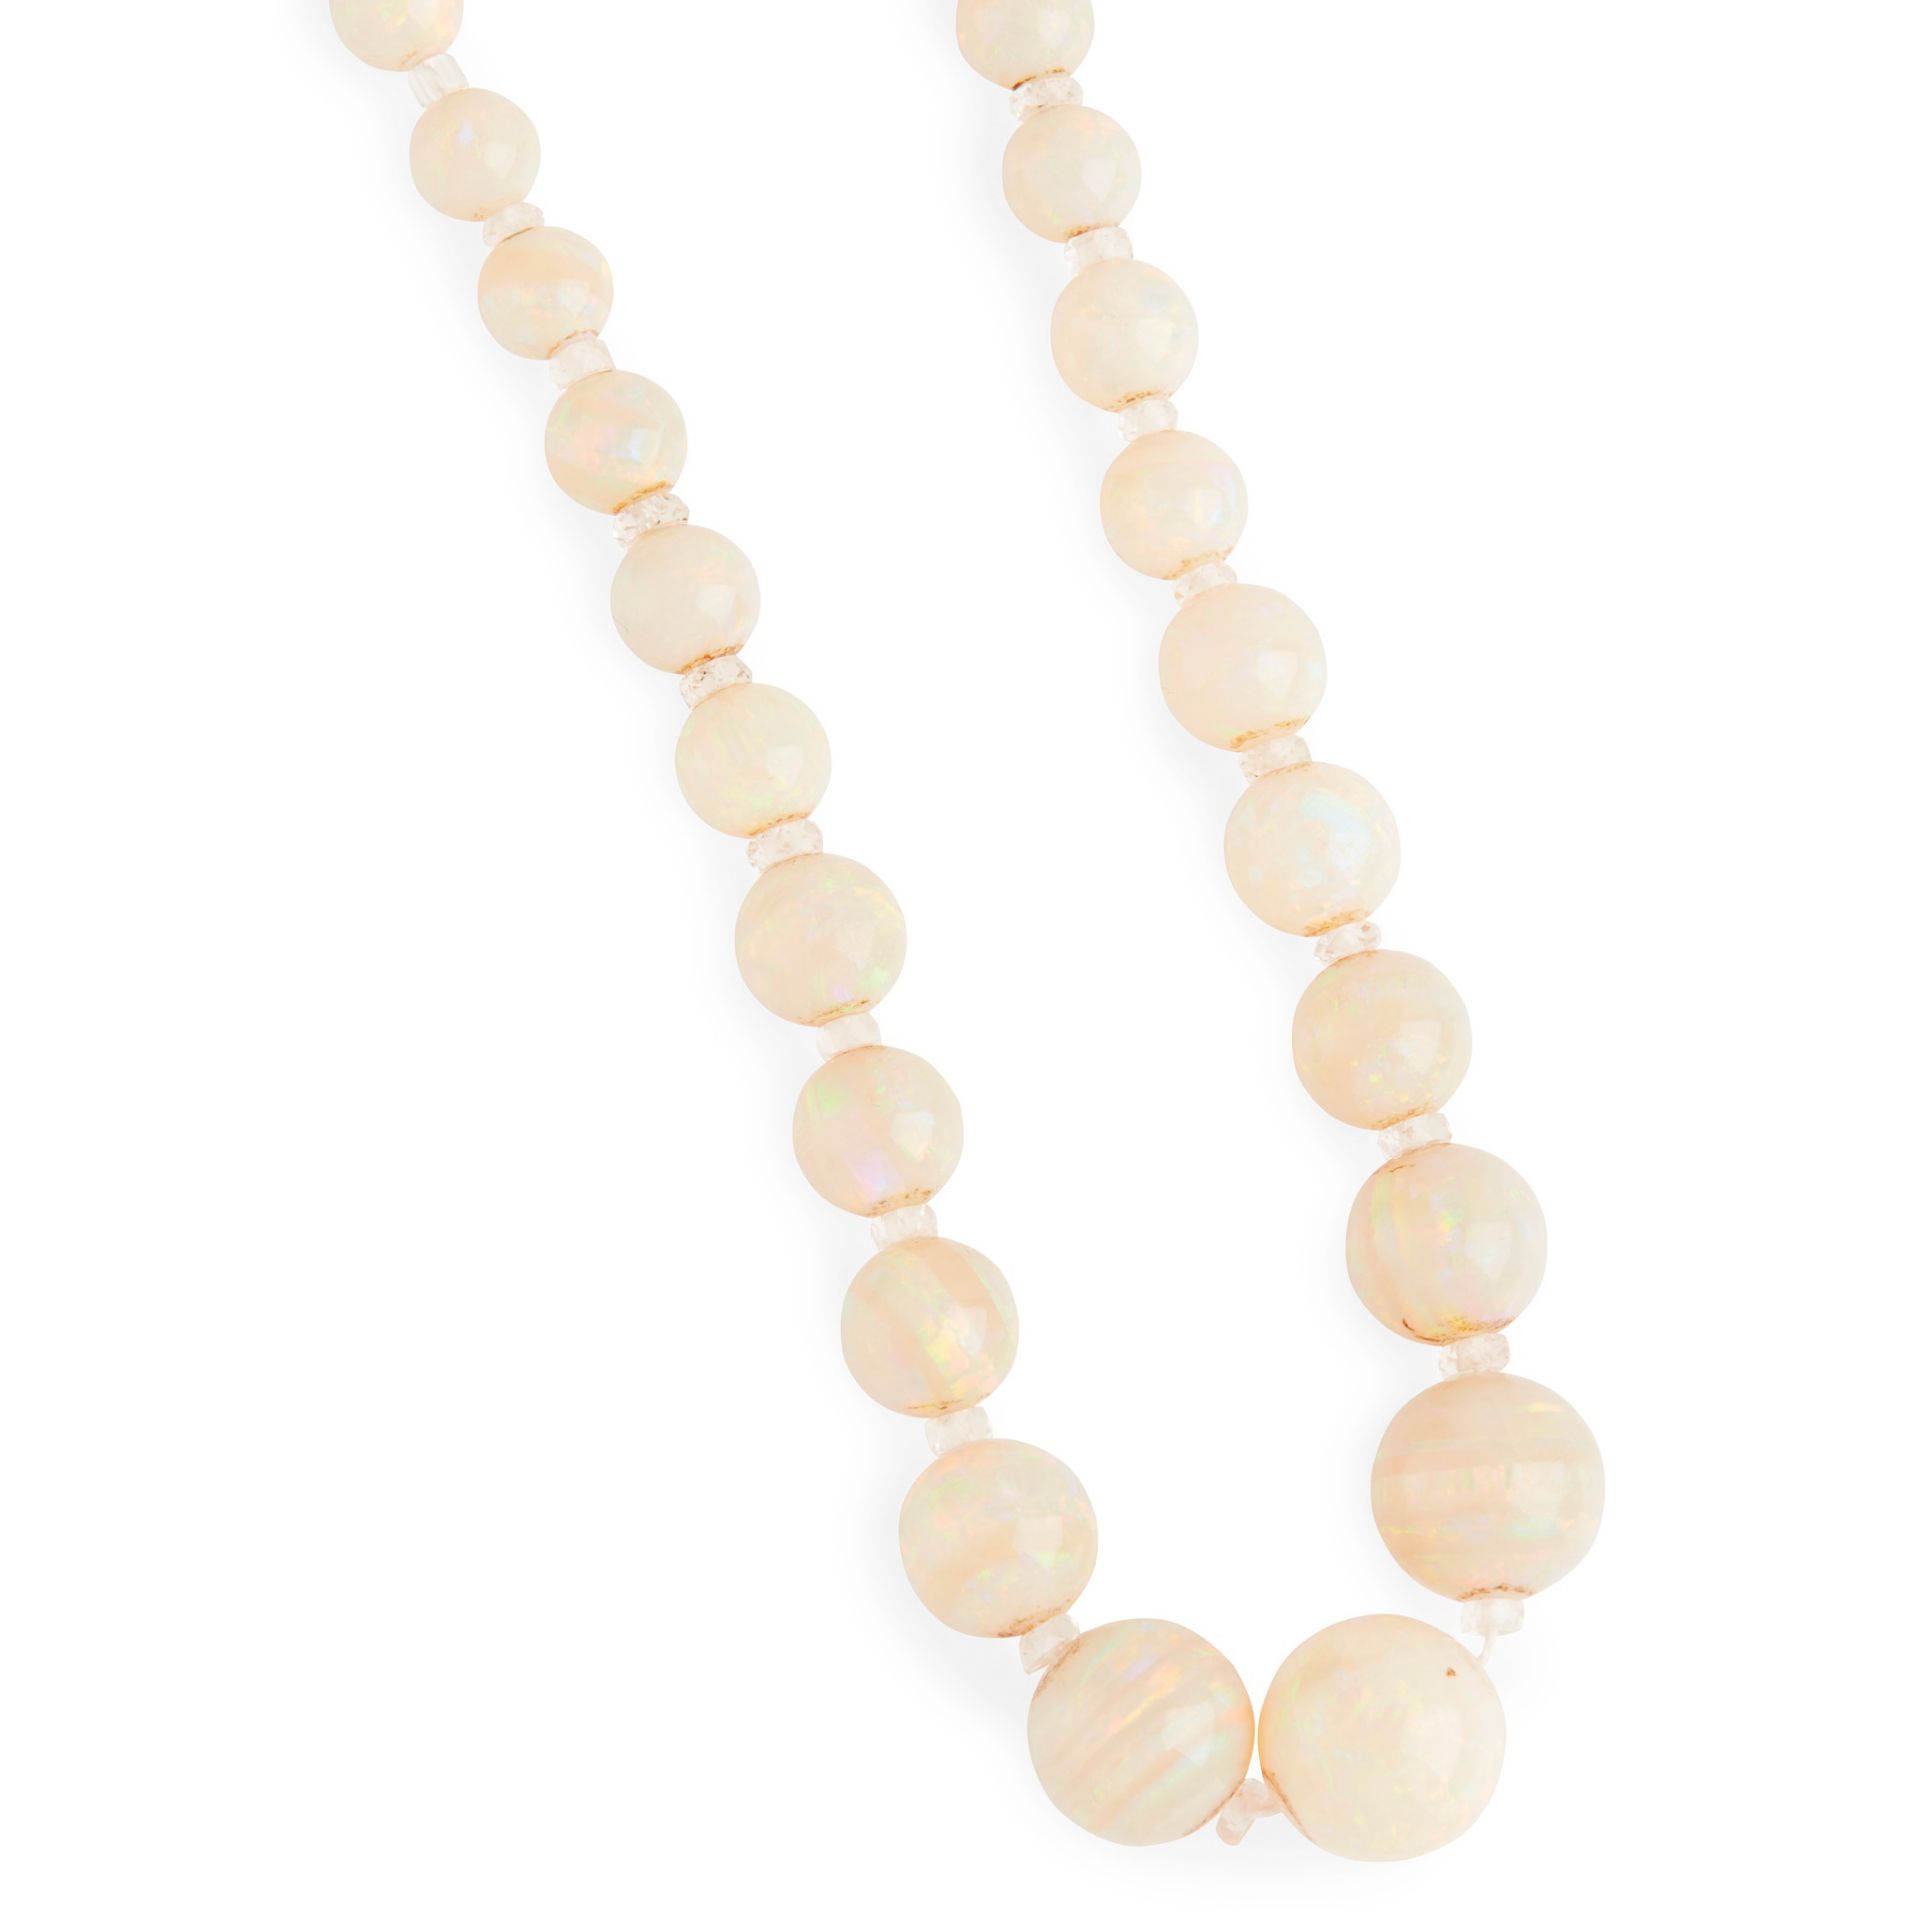 An opal and rock-crystal bead necklace - Image 2 of 2